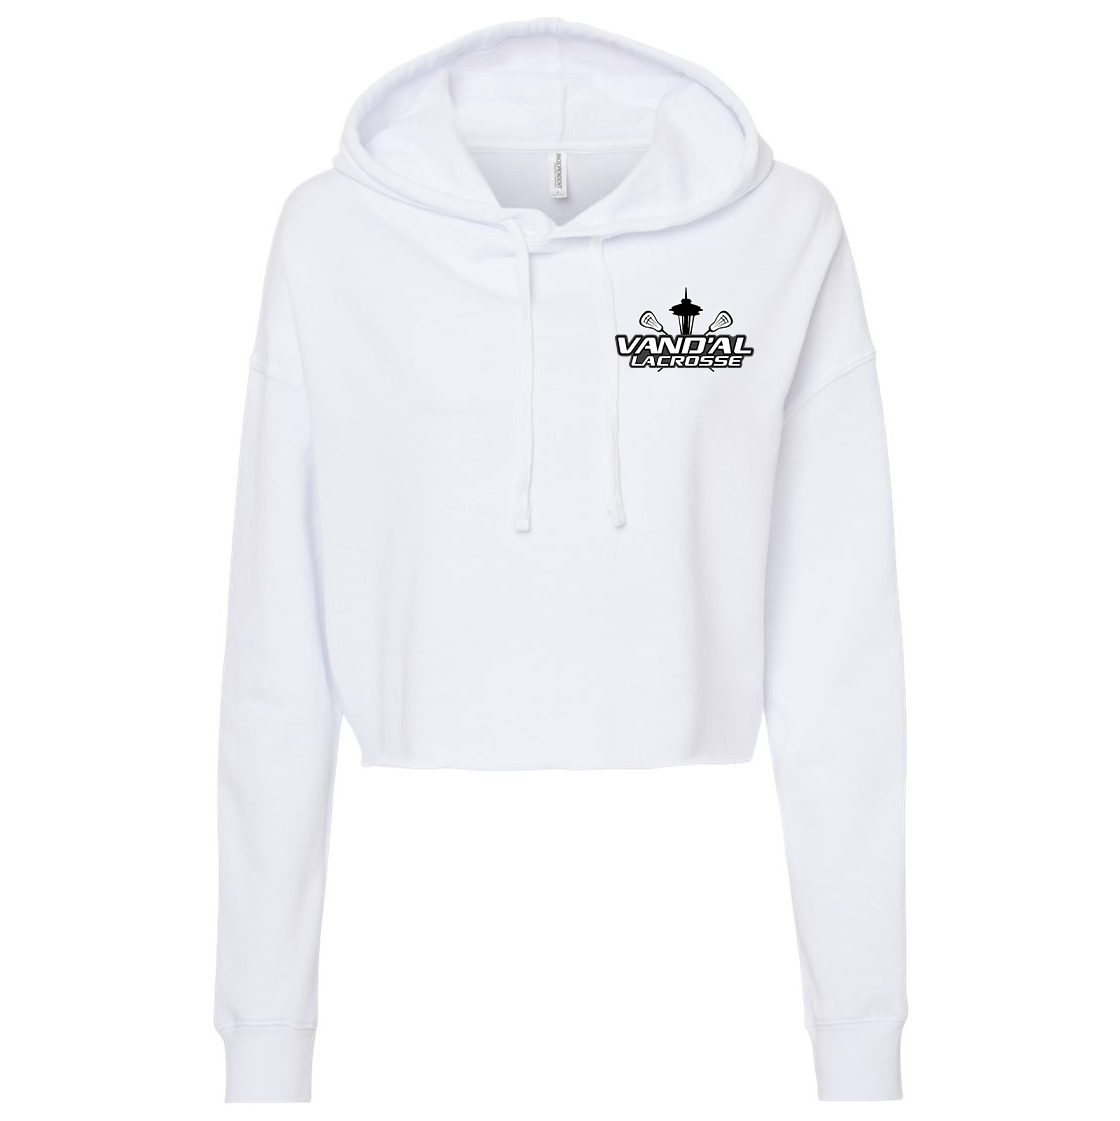 Vand'al Lacrosse Independent Trading Co. Women’s Lightweight Cropped Hooded Sweatshirt